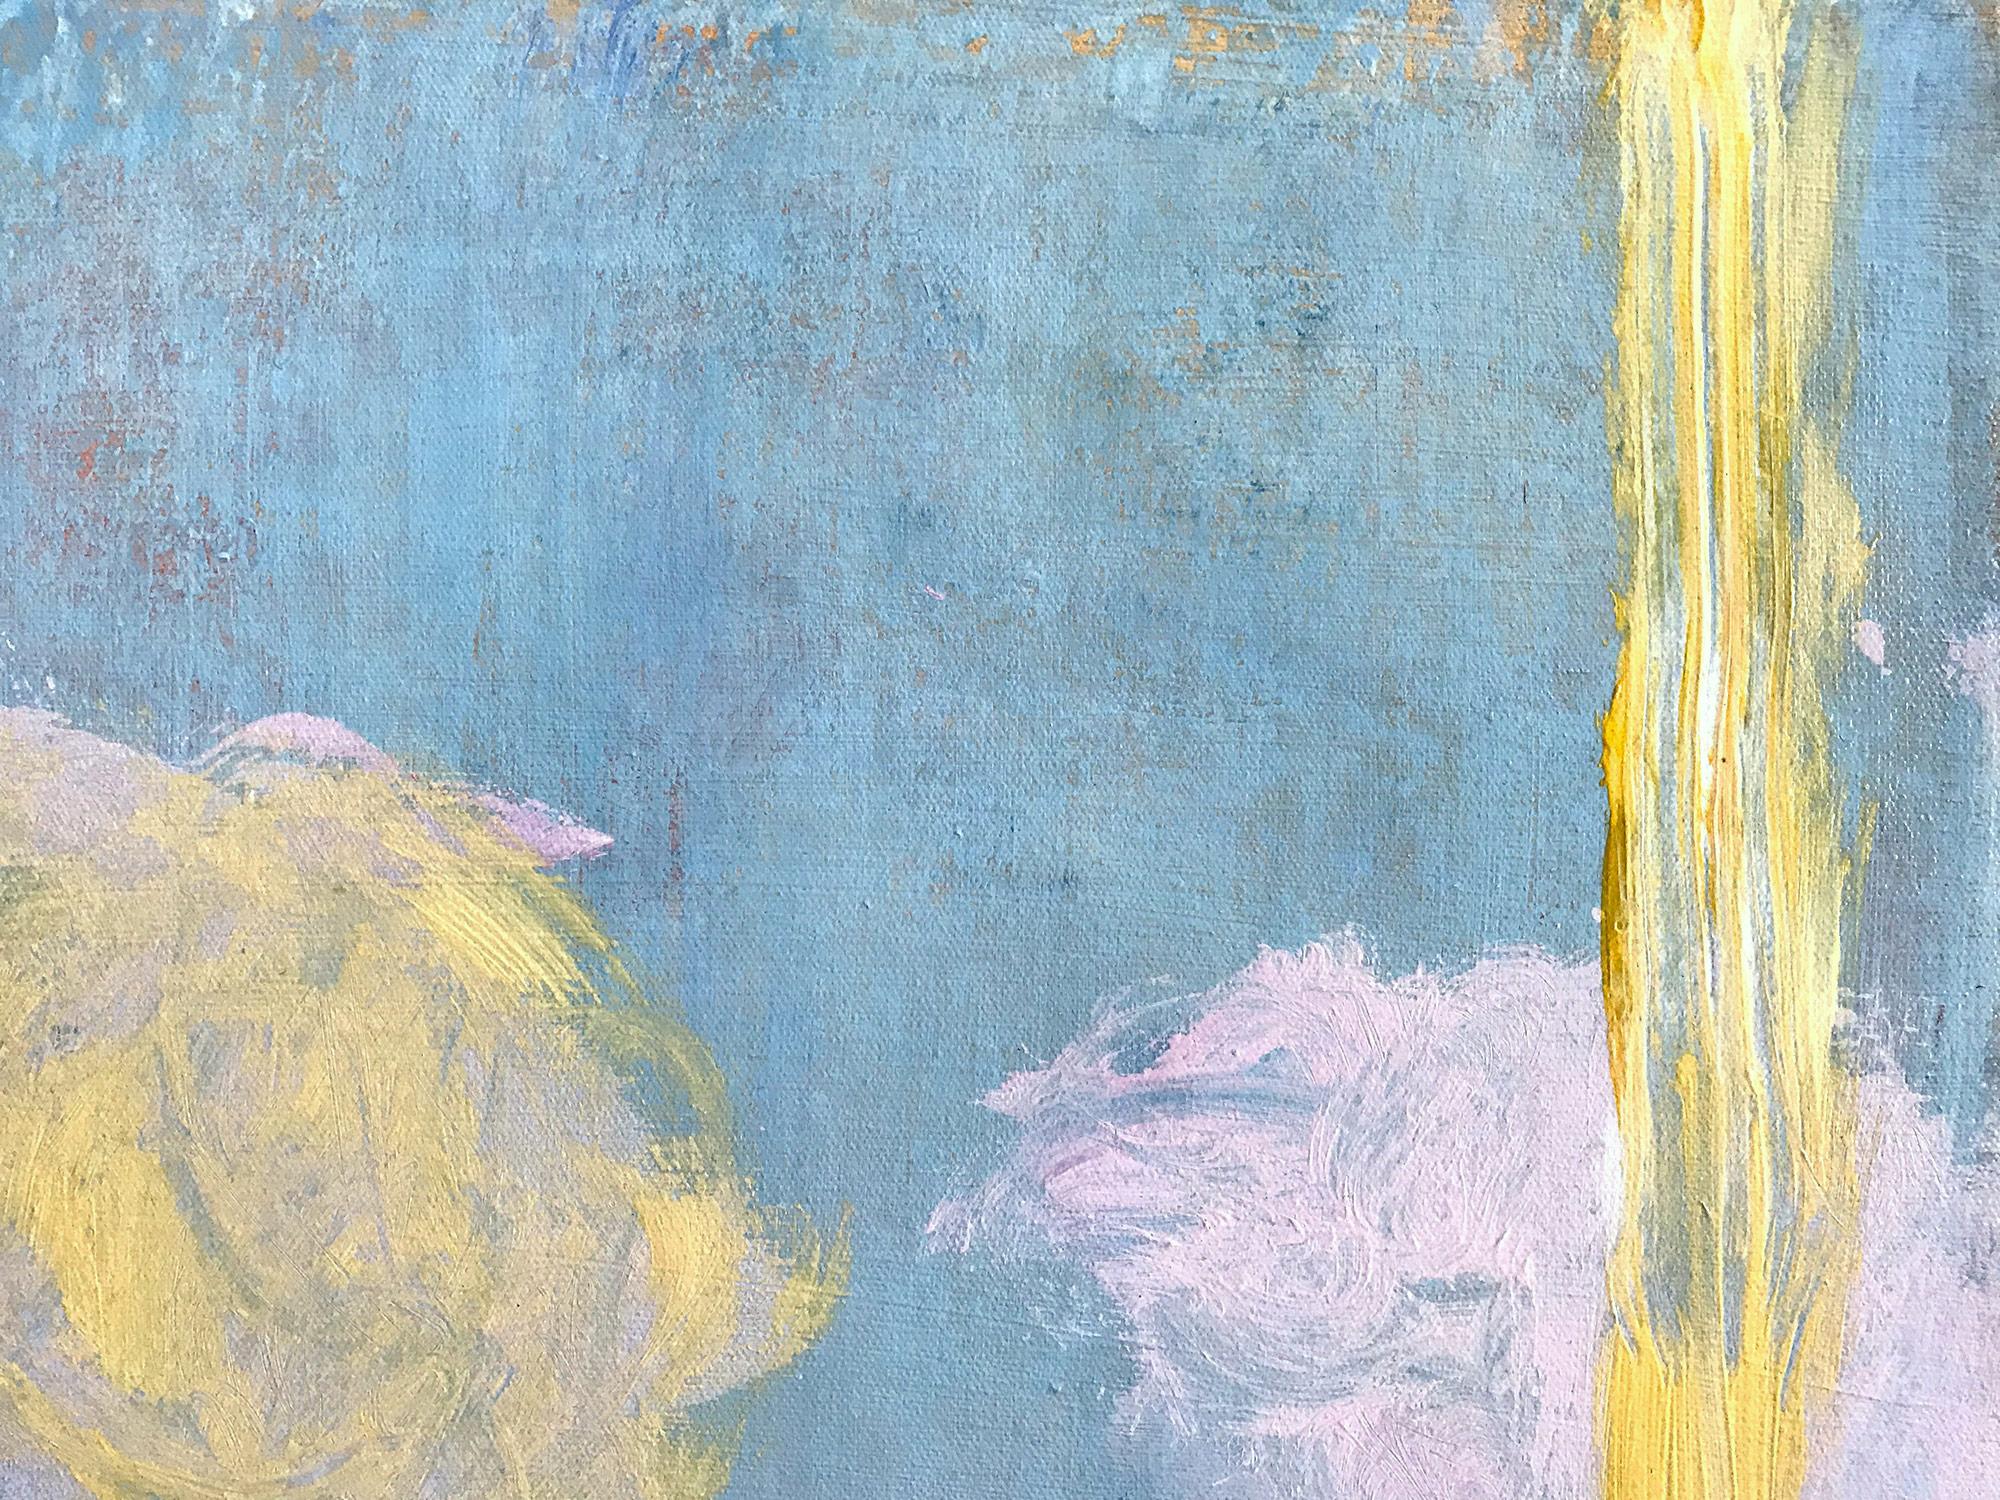 Advent in Yellow, Pink and Blue - Gray Abstract Painting by Robert Gregory Phillips